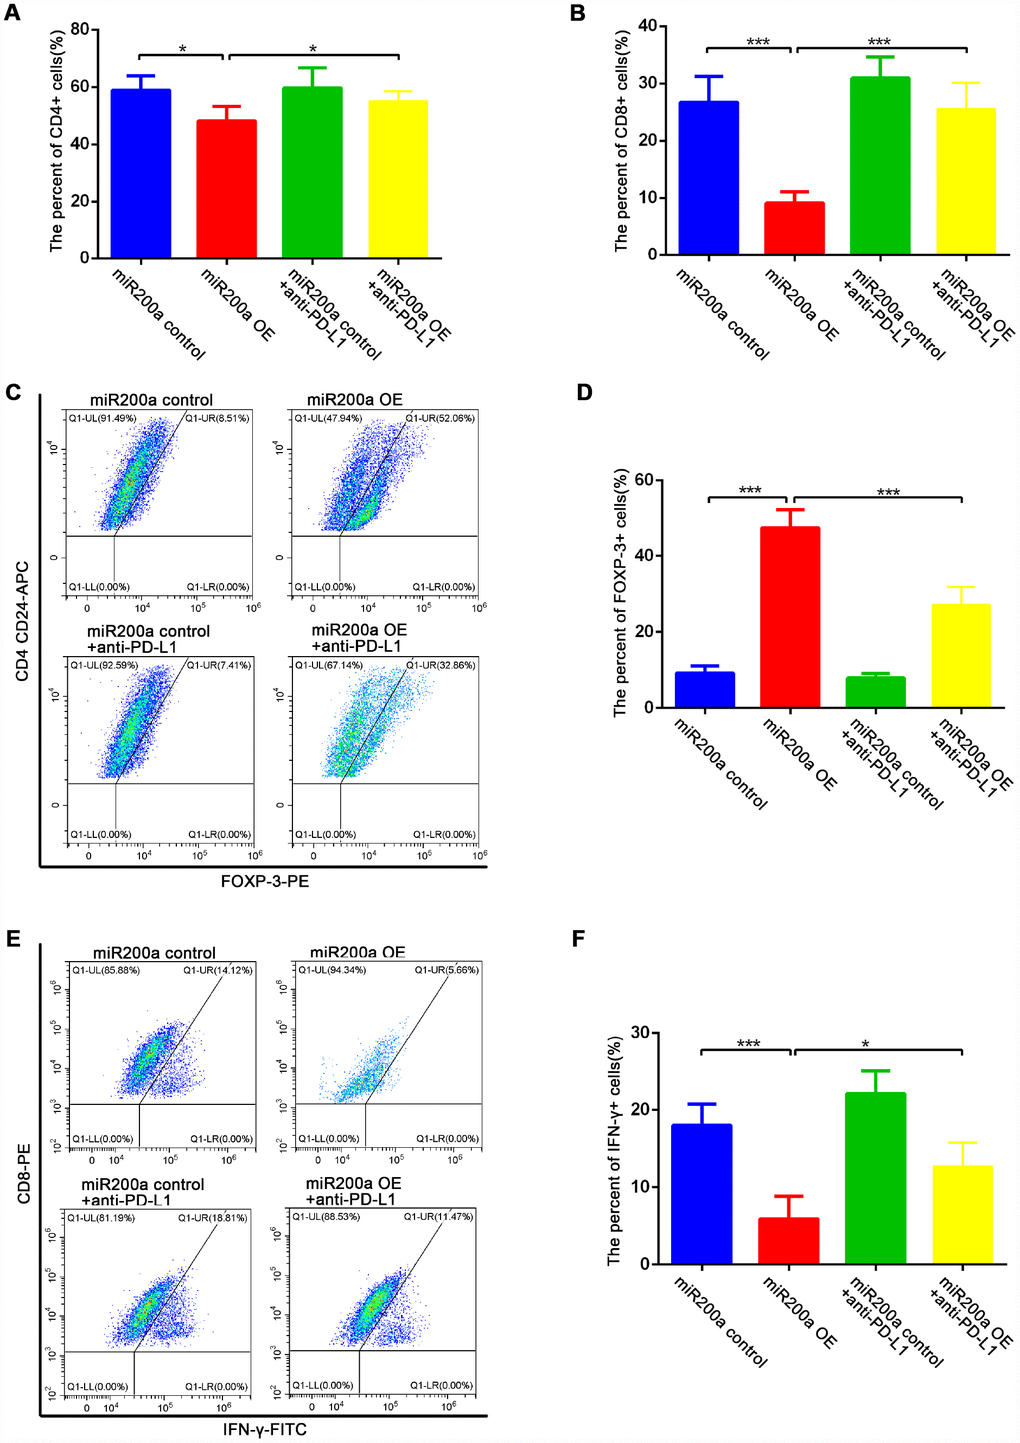 miR-200a impaired anti-tumor immunity in vivo. (A–B) Flow cytometry analysis of intratumoral proportion of CD4+ and CD8+ T cells. (C–D) Flow cytometry analysis of intratumoral proportion of Foxp3+ Treg cells. (E–F) Flow cytometry analysis of intratumoral proportion of IFN-γ+ CTLs. *P